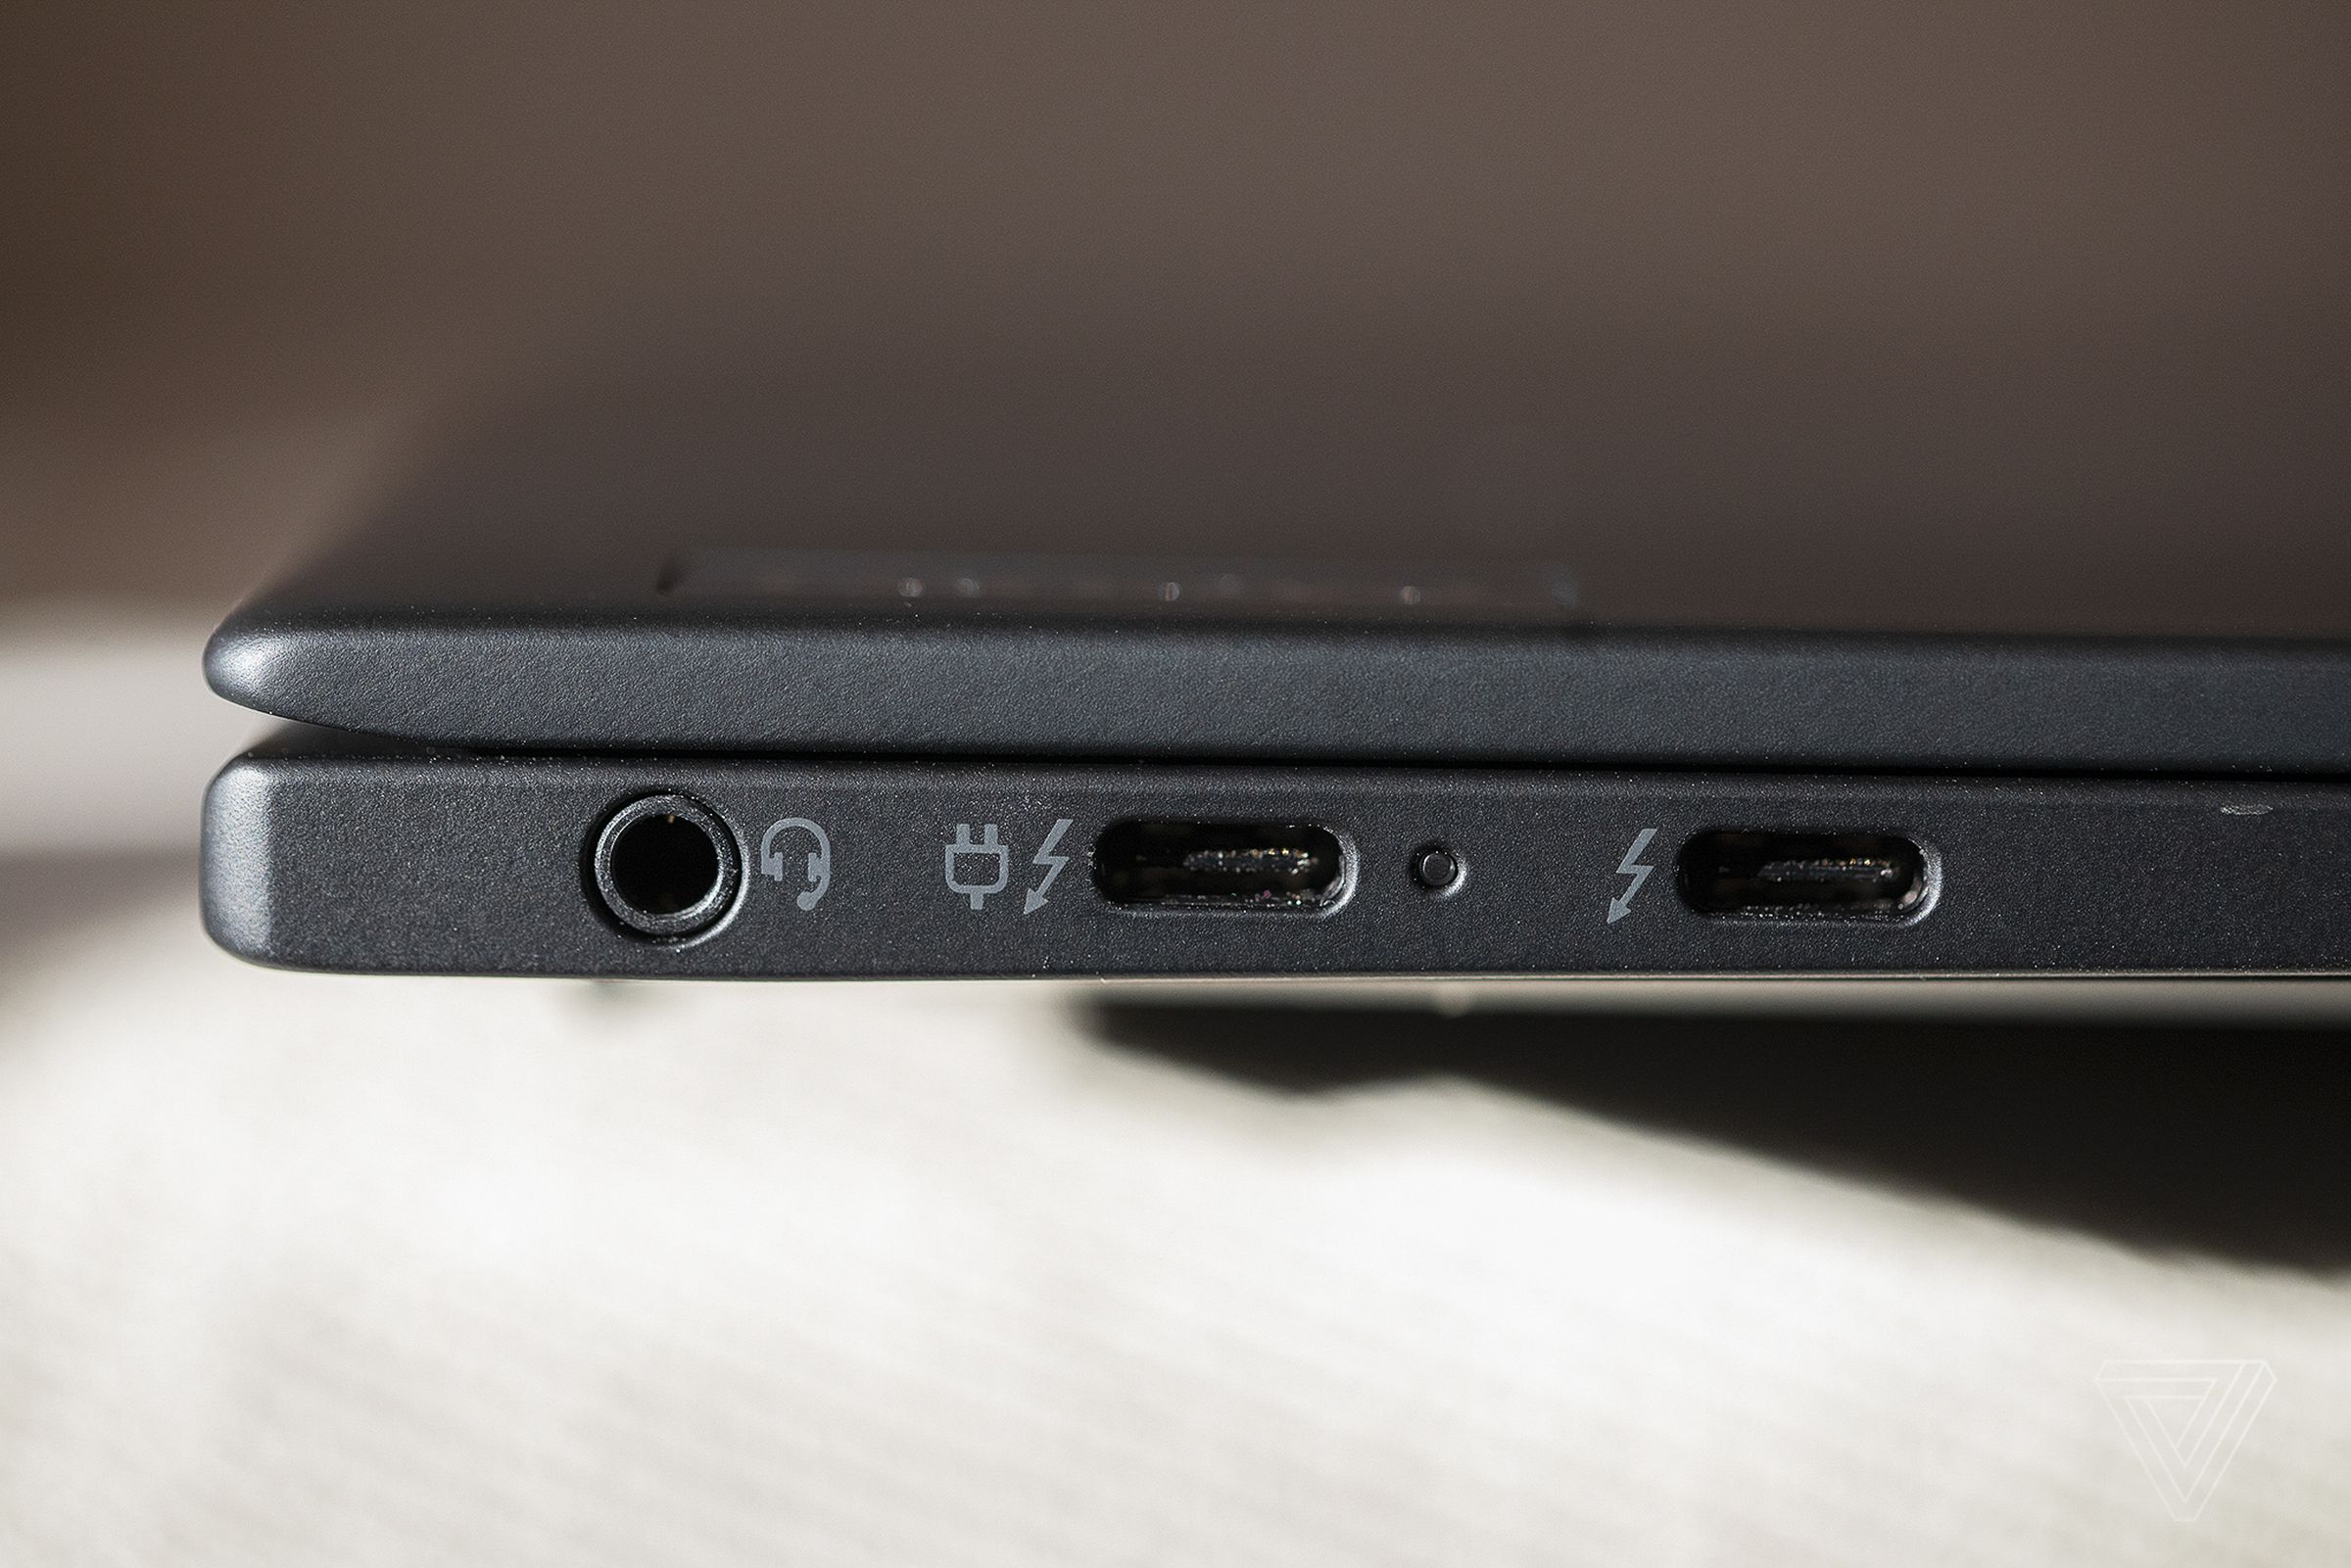 The ports on the left side of the ThinkPad X1 Nano.